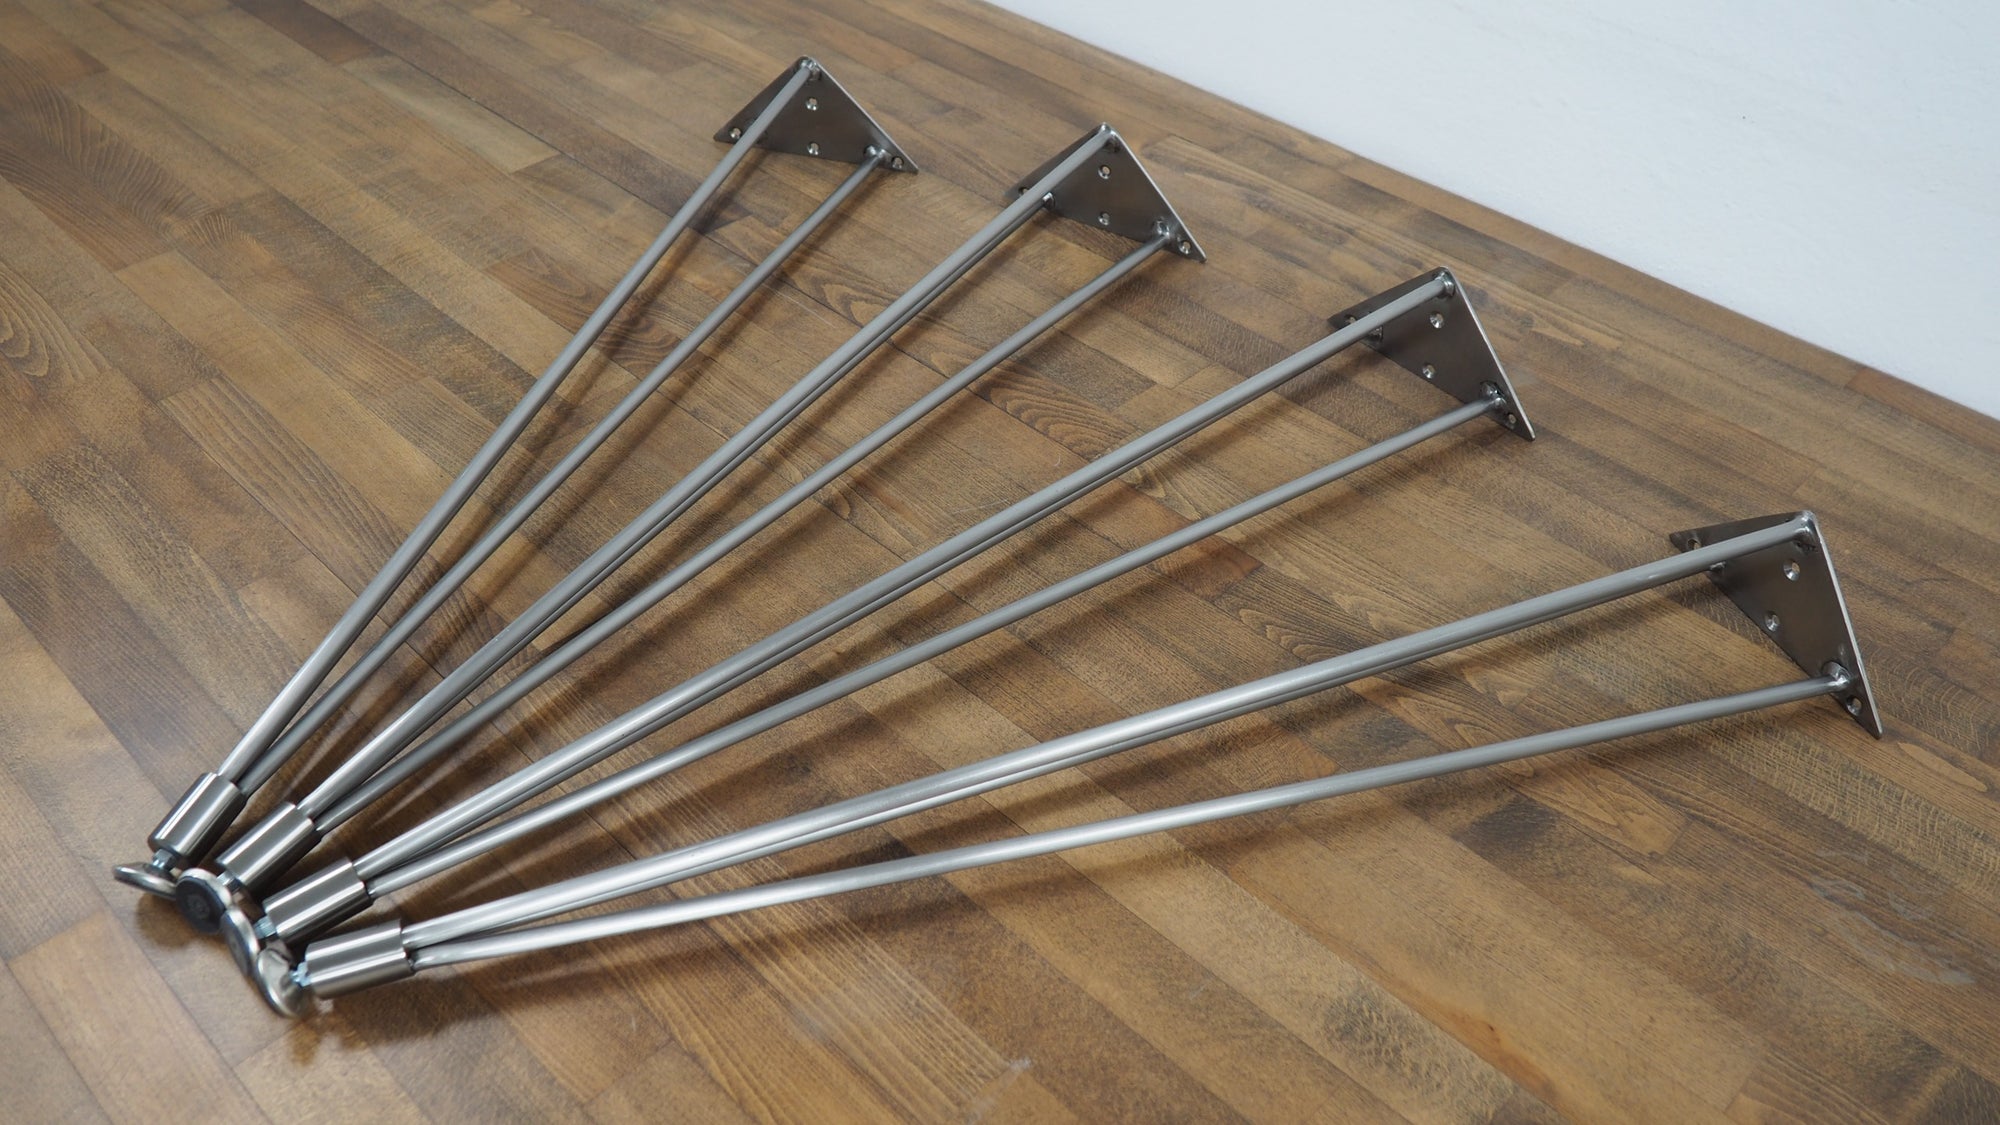 28" 3 Pin S Hairpin Table Legs,stainless Steel, Height 26" To 32" Set(4)